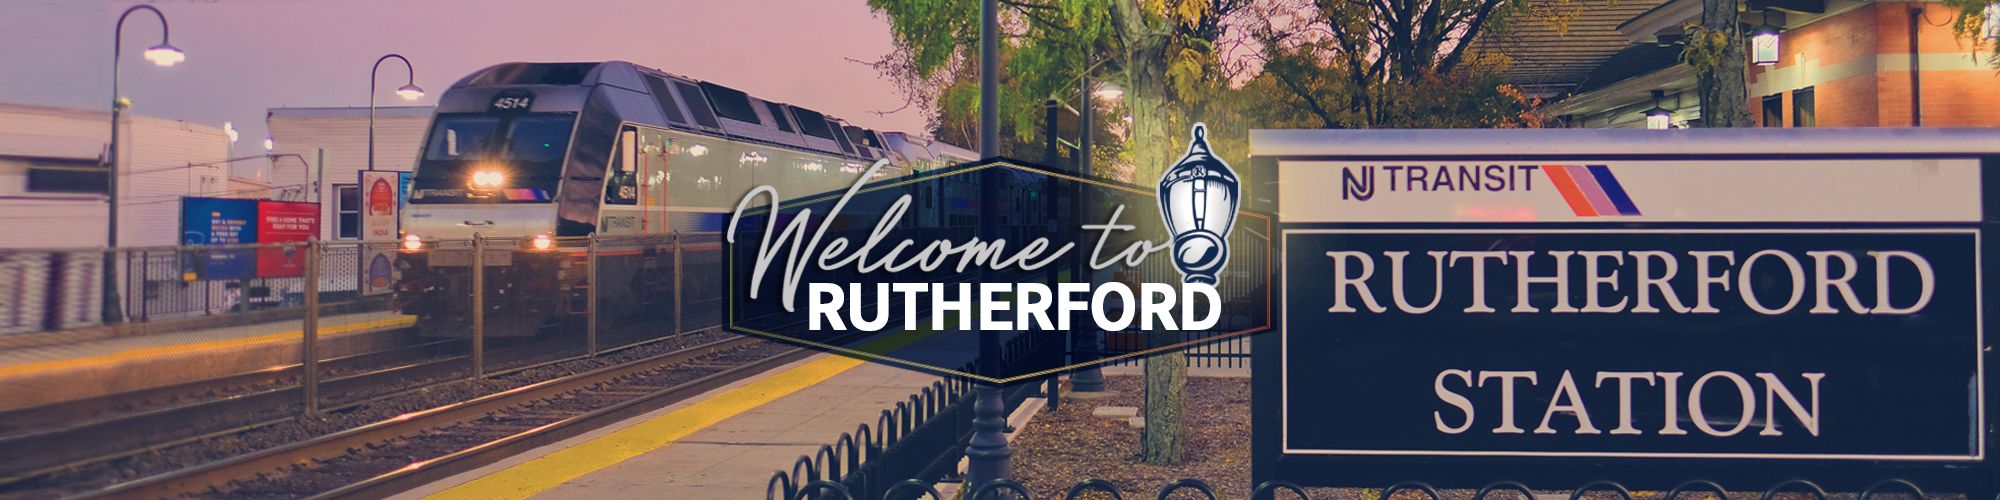 The Borough of Rutherford, New Jersey